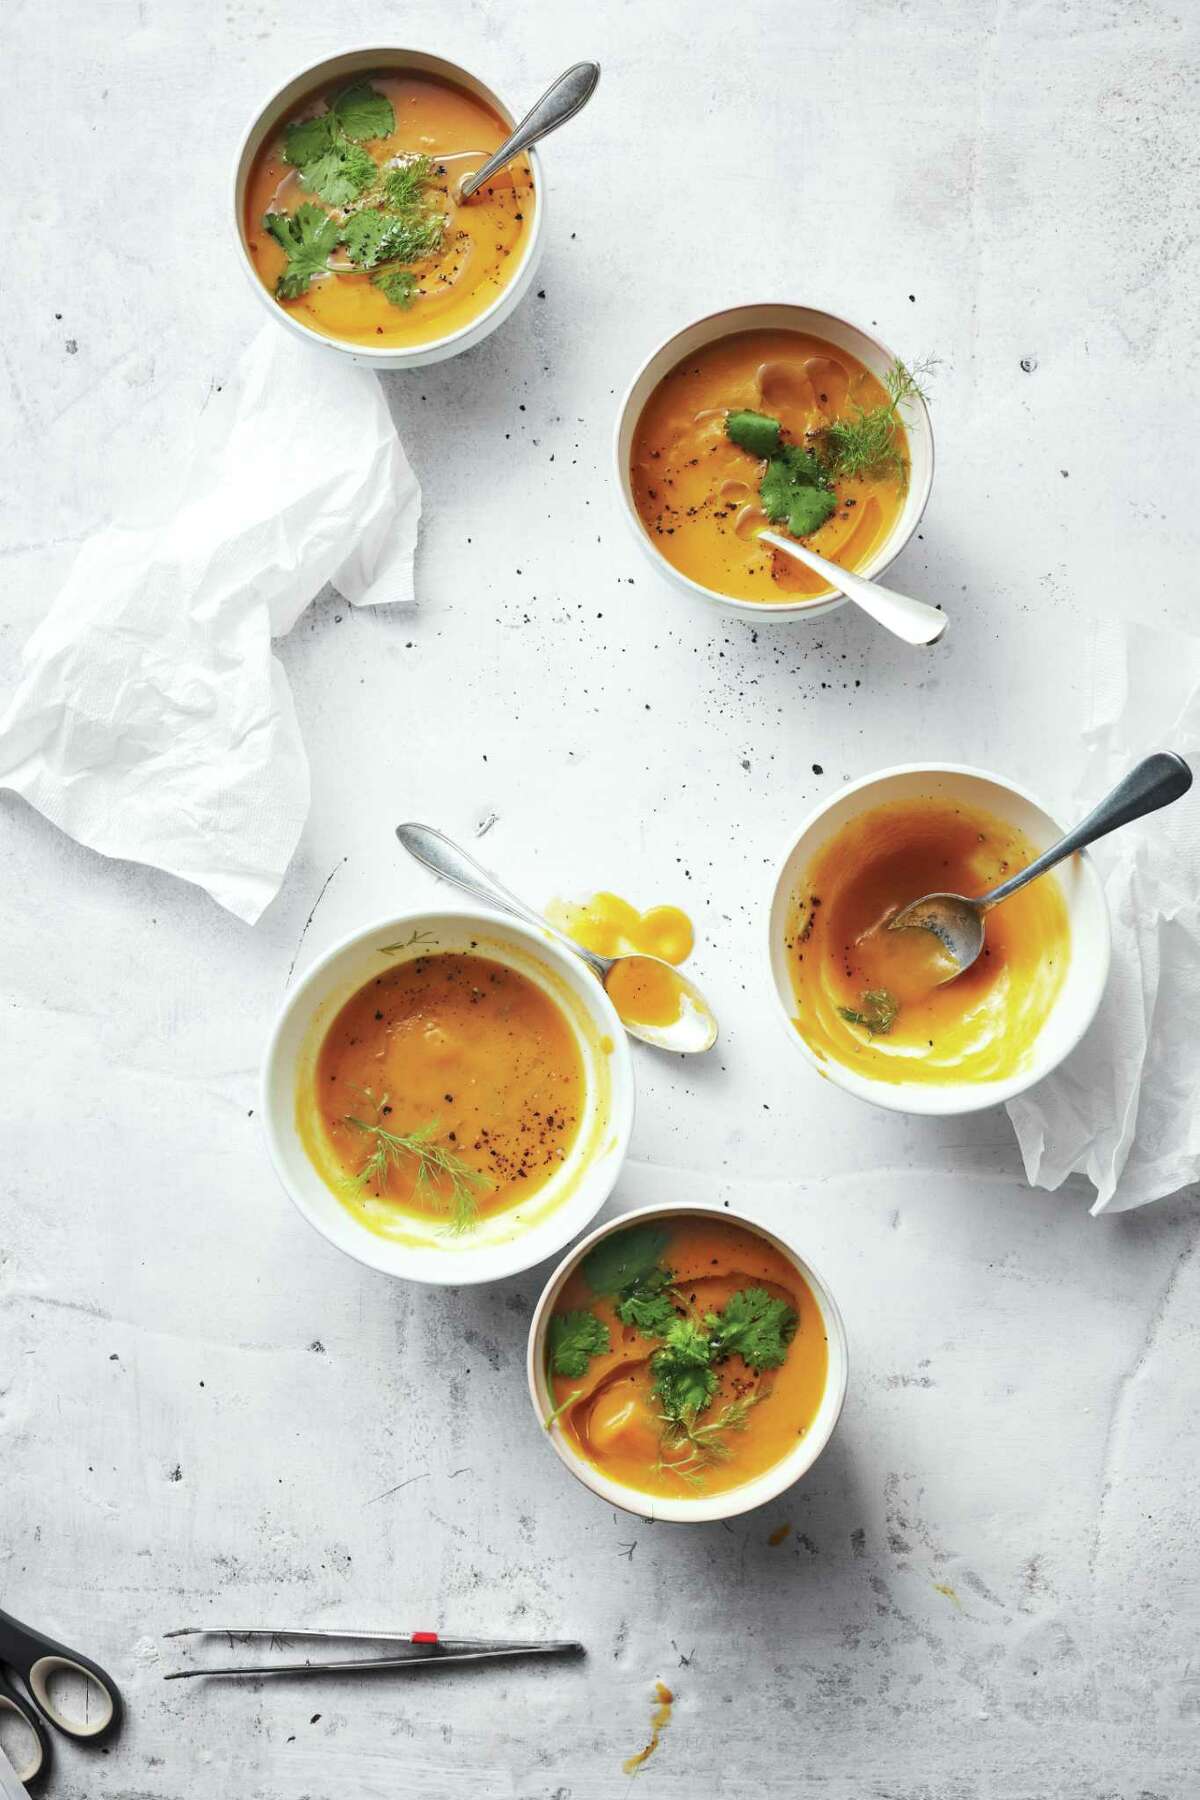 Butternut Squash Soup with Coriander and Lemon from "Dinner in an Instant: 75 Modern Recipes for Your Pressure Cooker, Multicooker, and Instant Pot" by Melissa Clark (Clarkson Potter, $22).